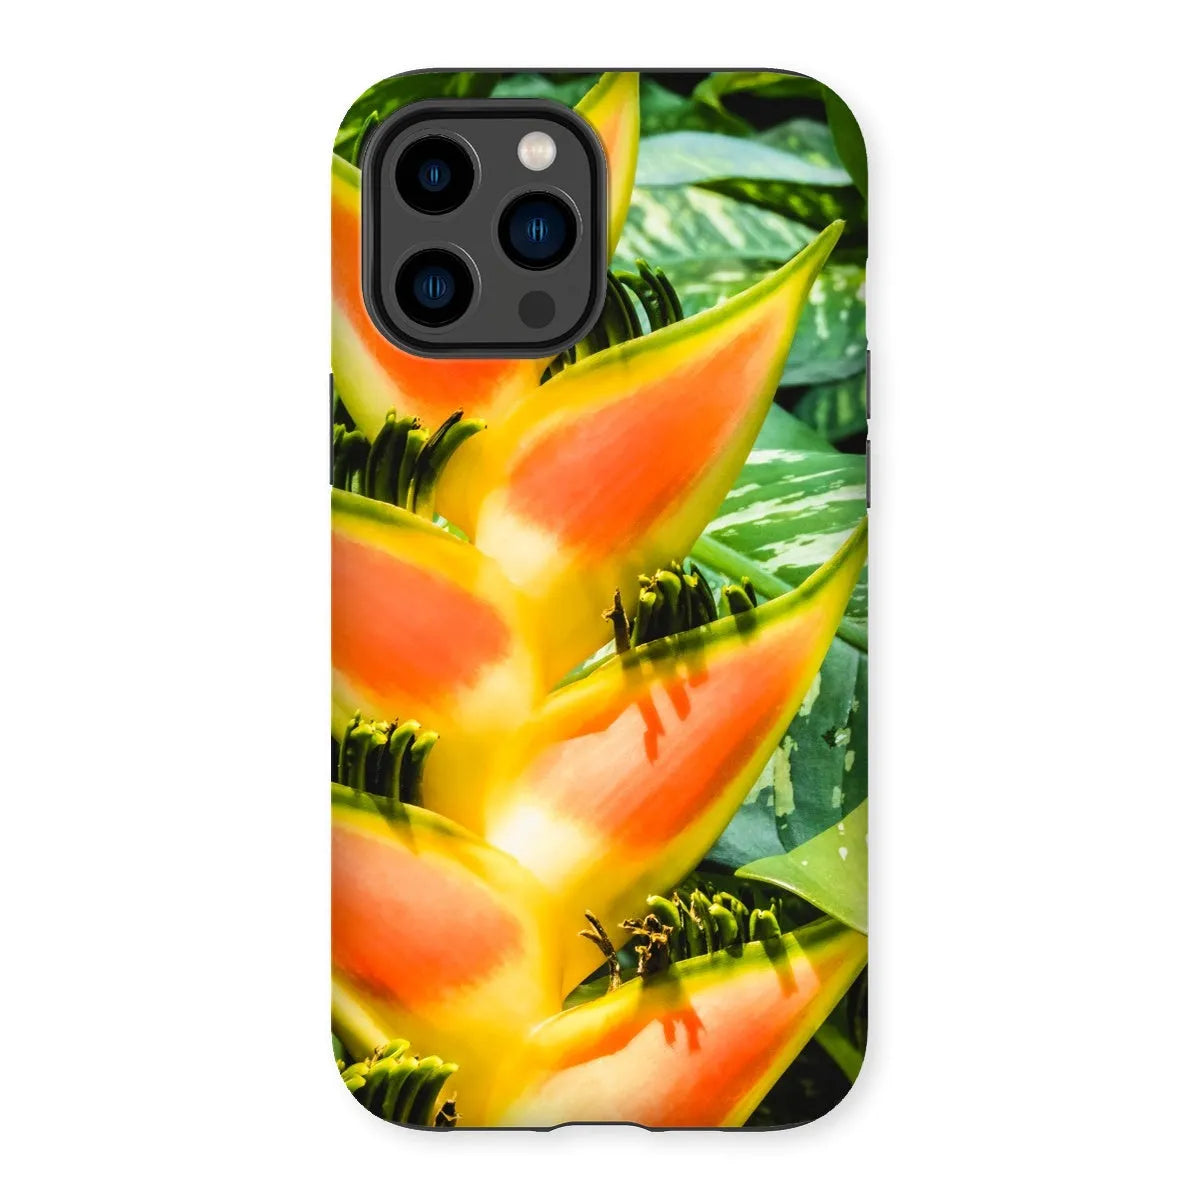 Showstopper Tough Phone Case - Iphone 14 Pro Max / Matte - Mobile Phone Cases - Aesthetic Art